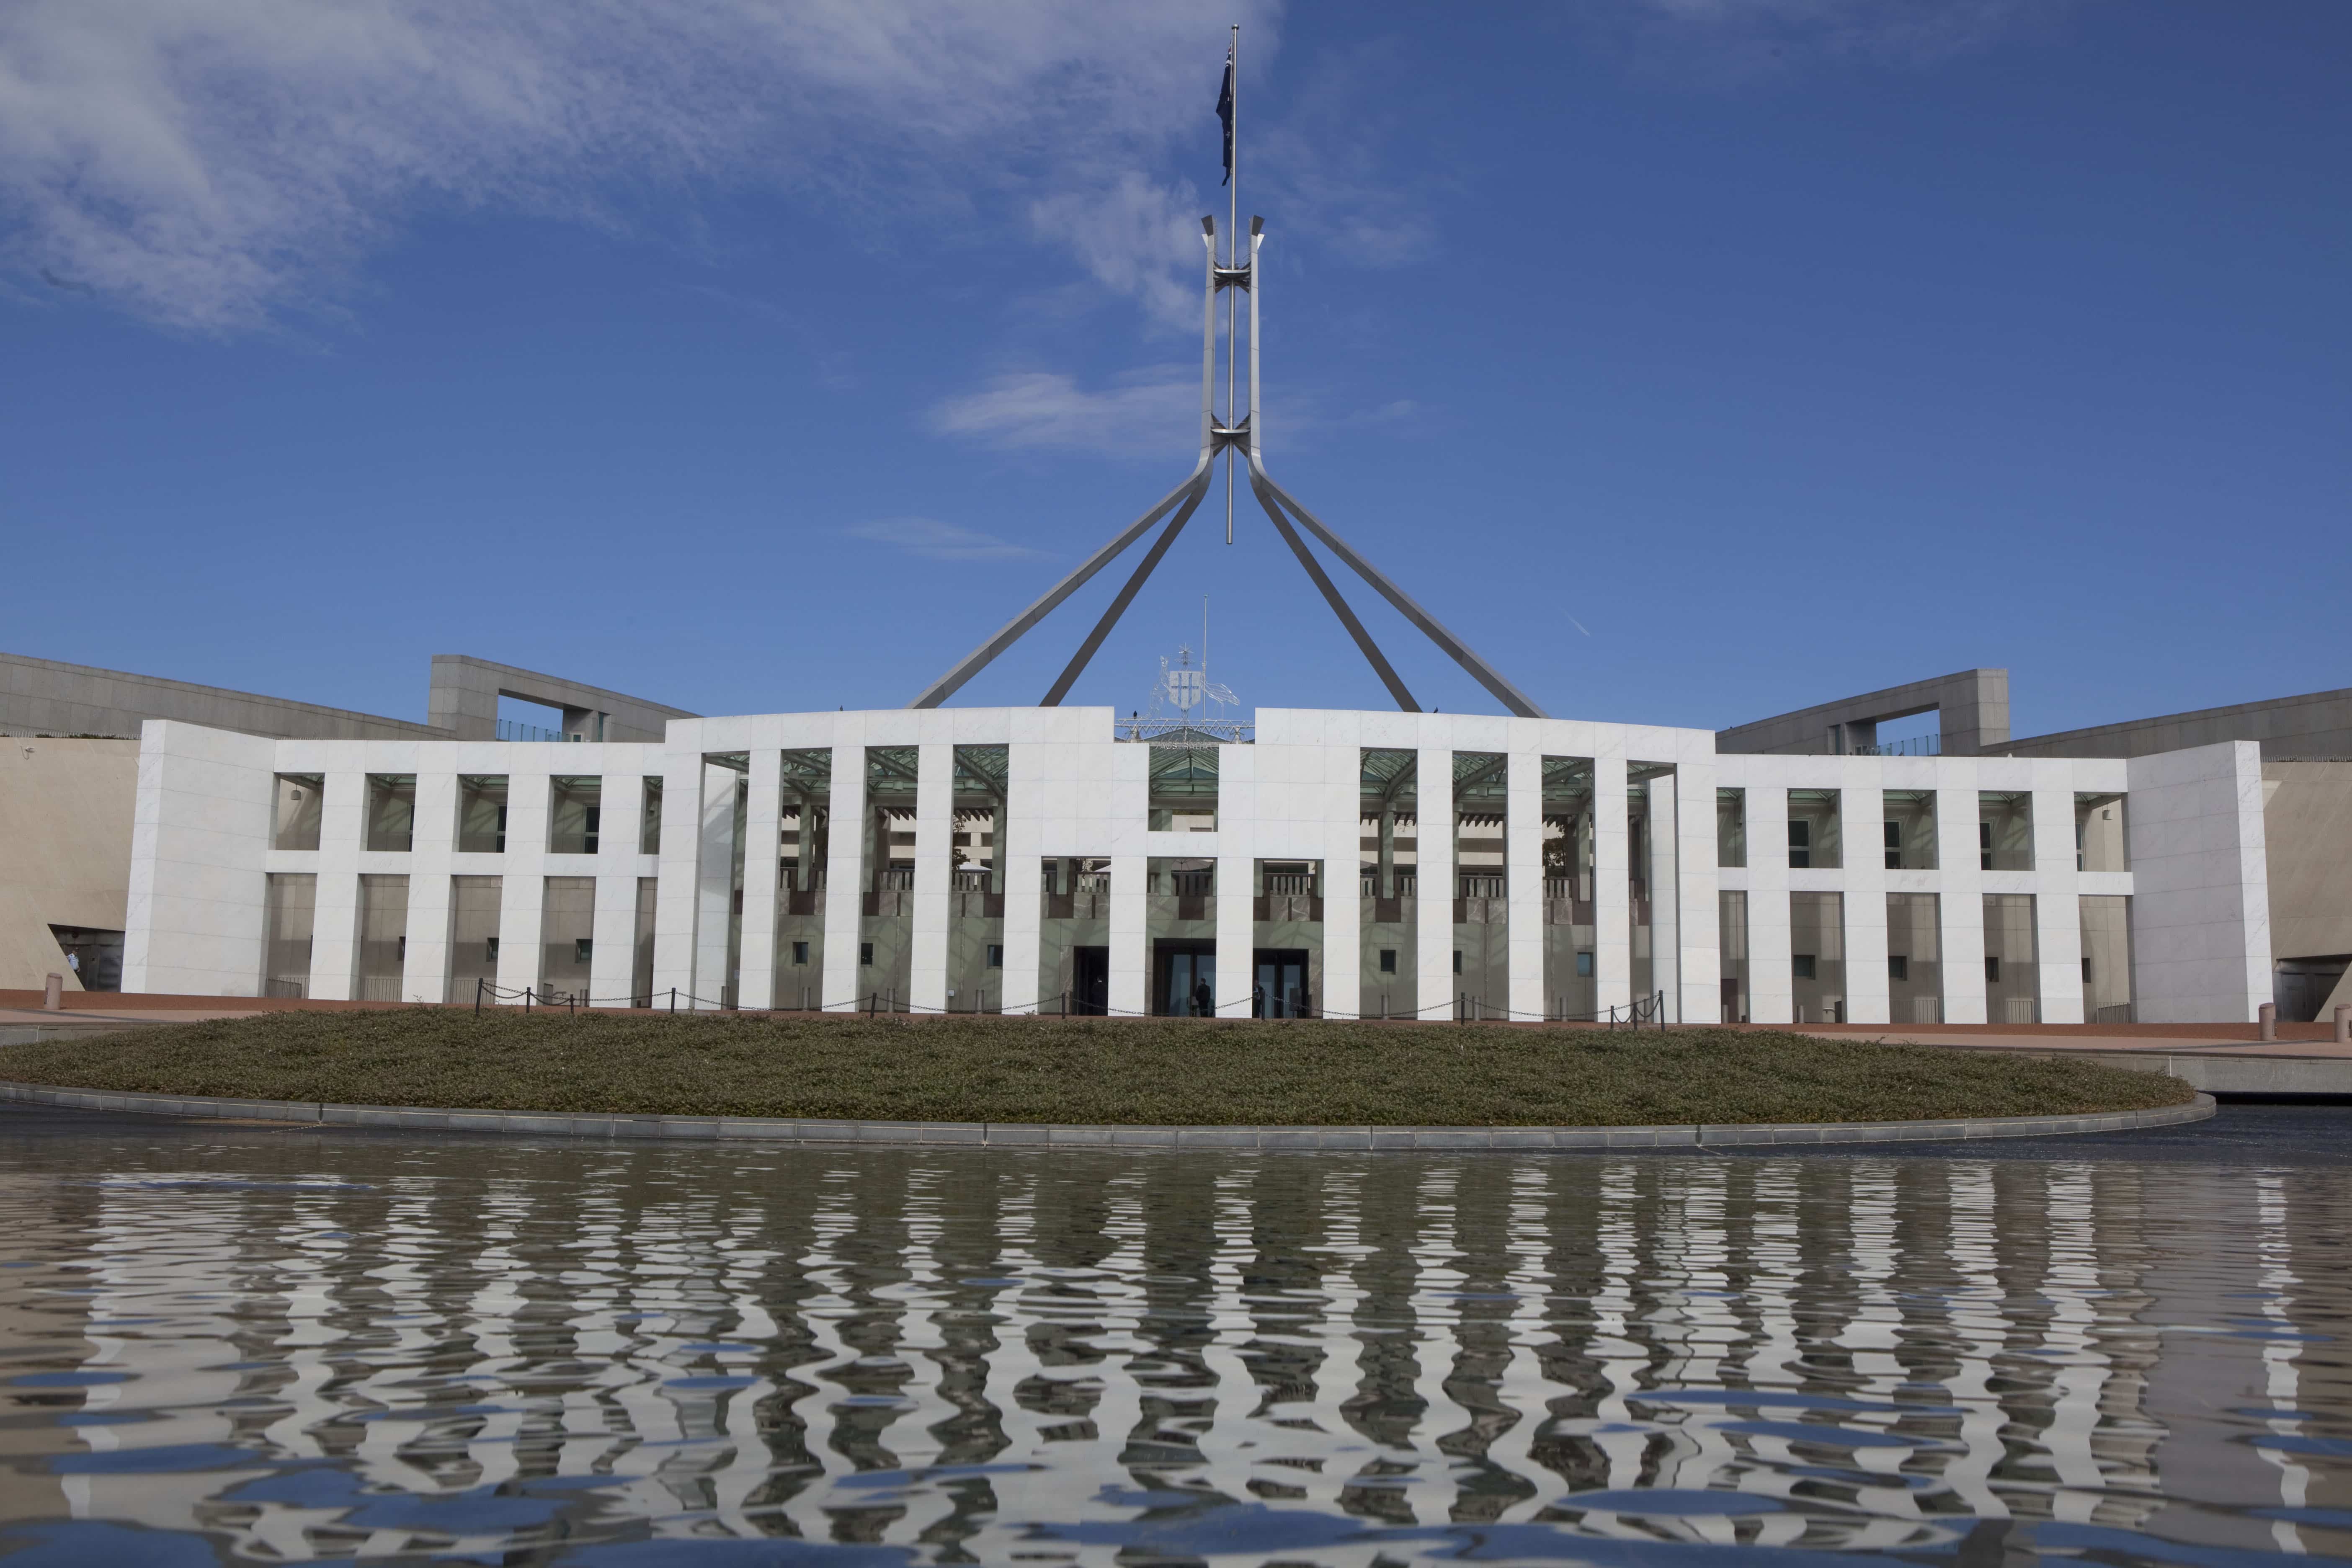 Australia's Federal Parliament in Canberra pictured in May 2012, REUTERS/Andrew Taylor